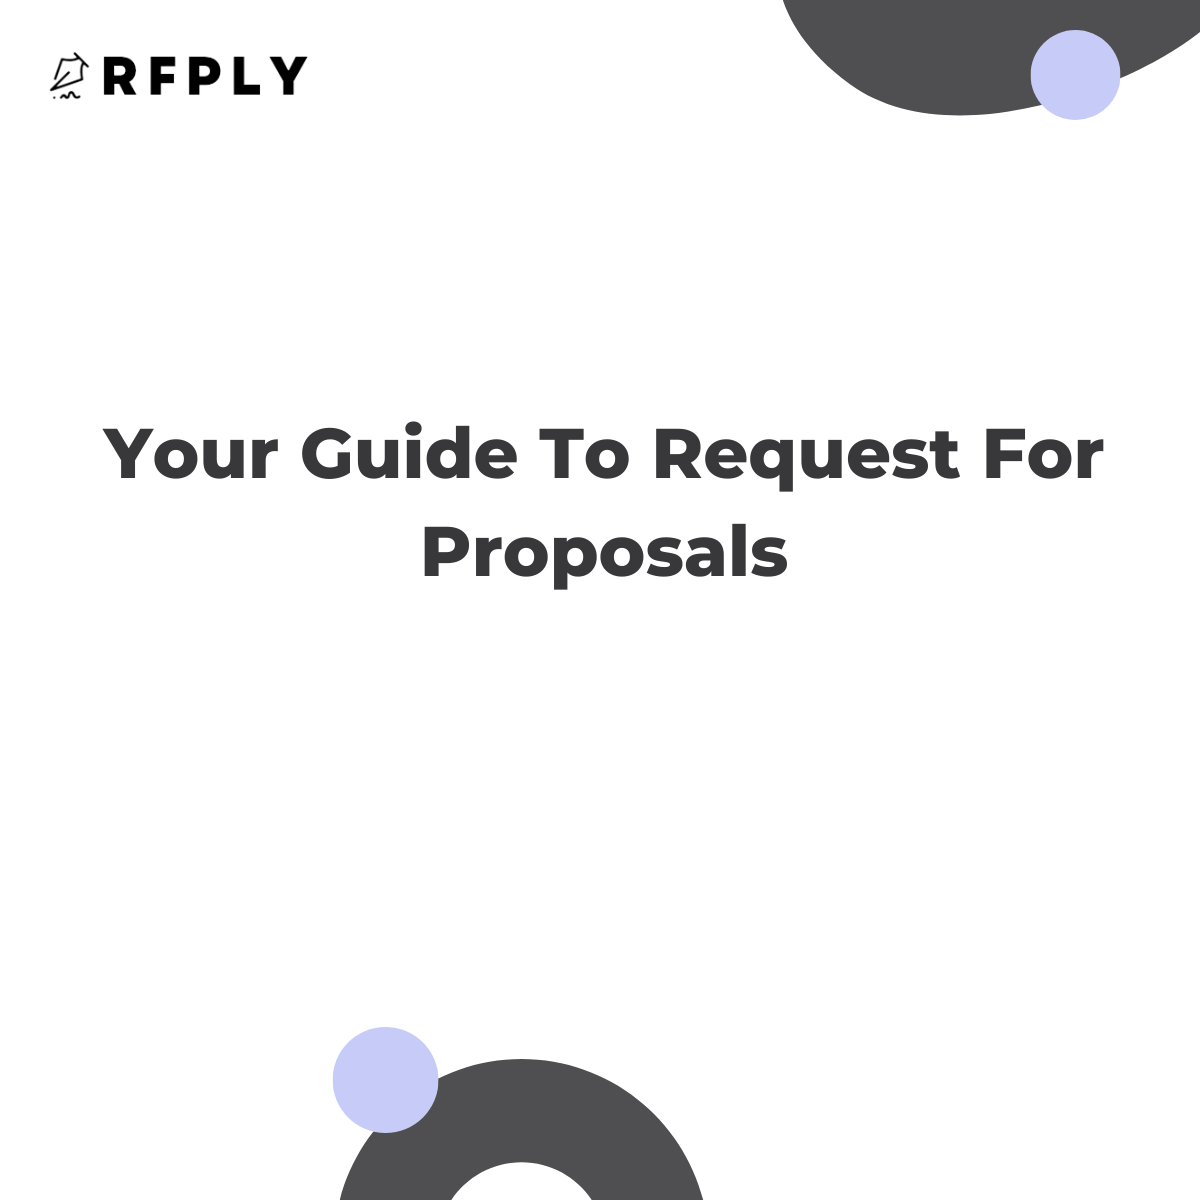 Your Guide To Request For Proposals